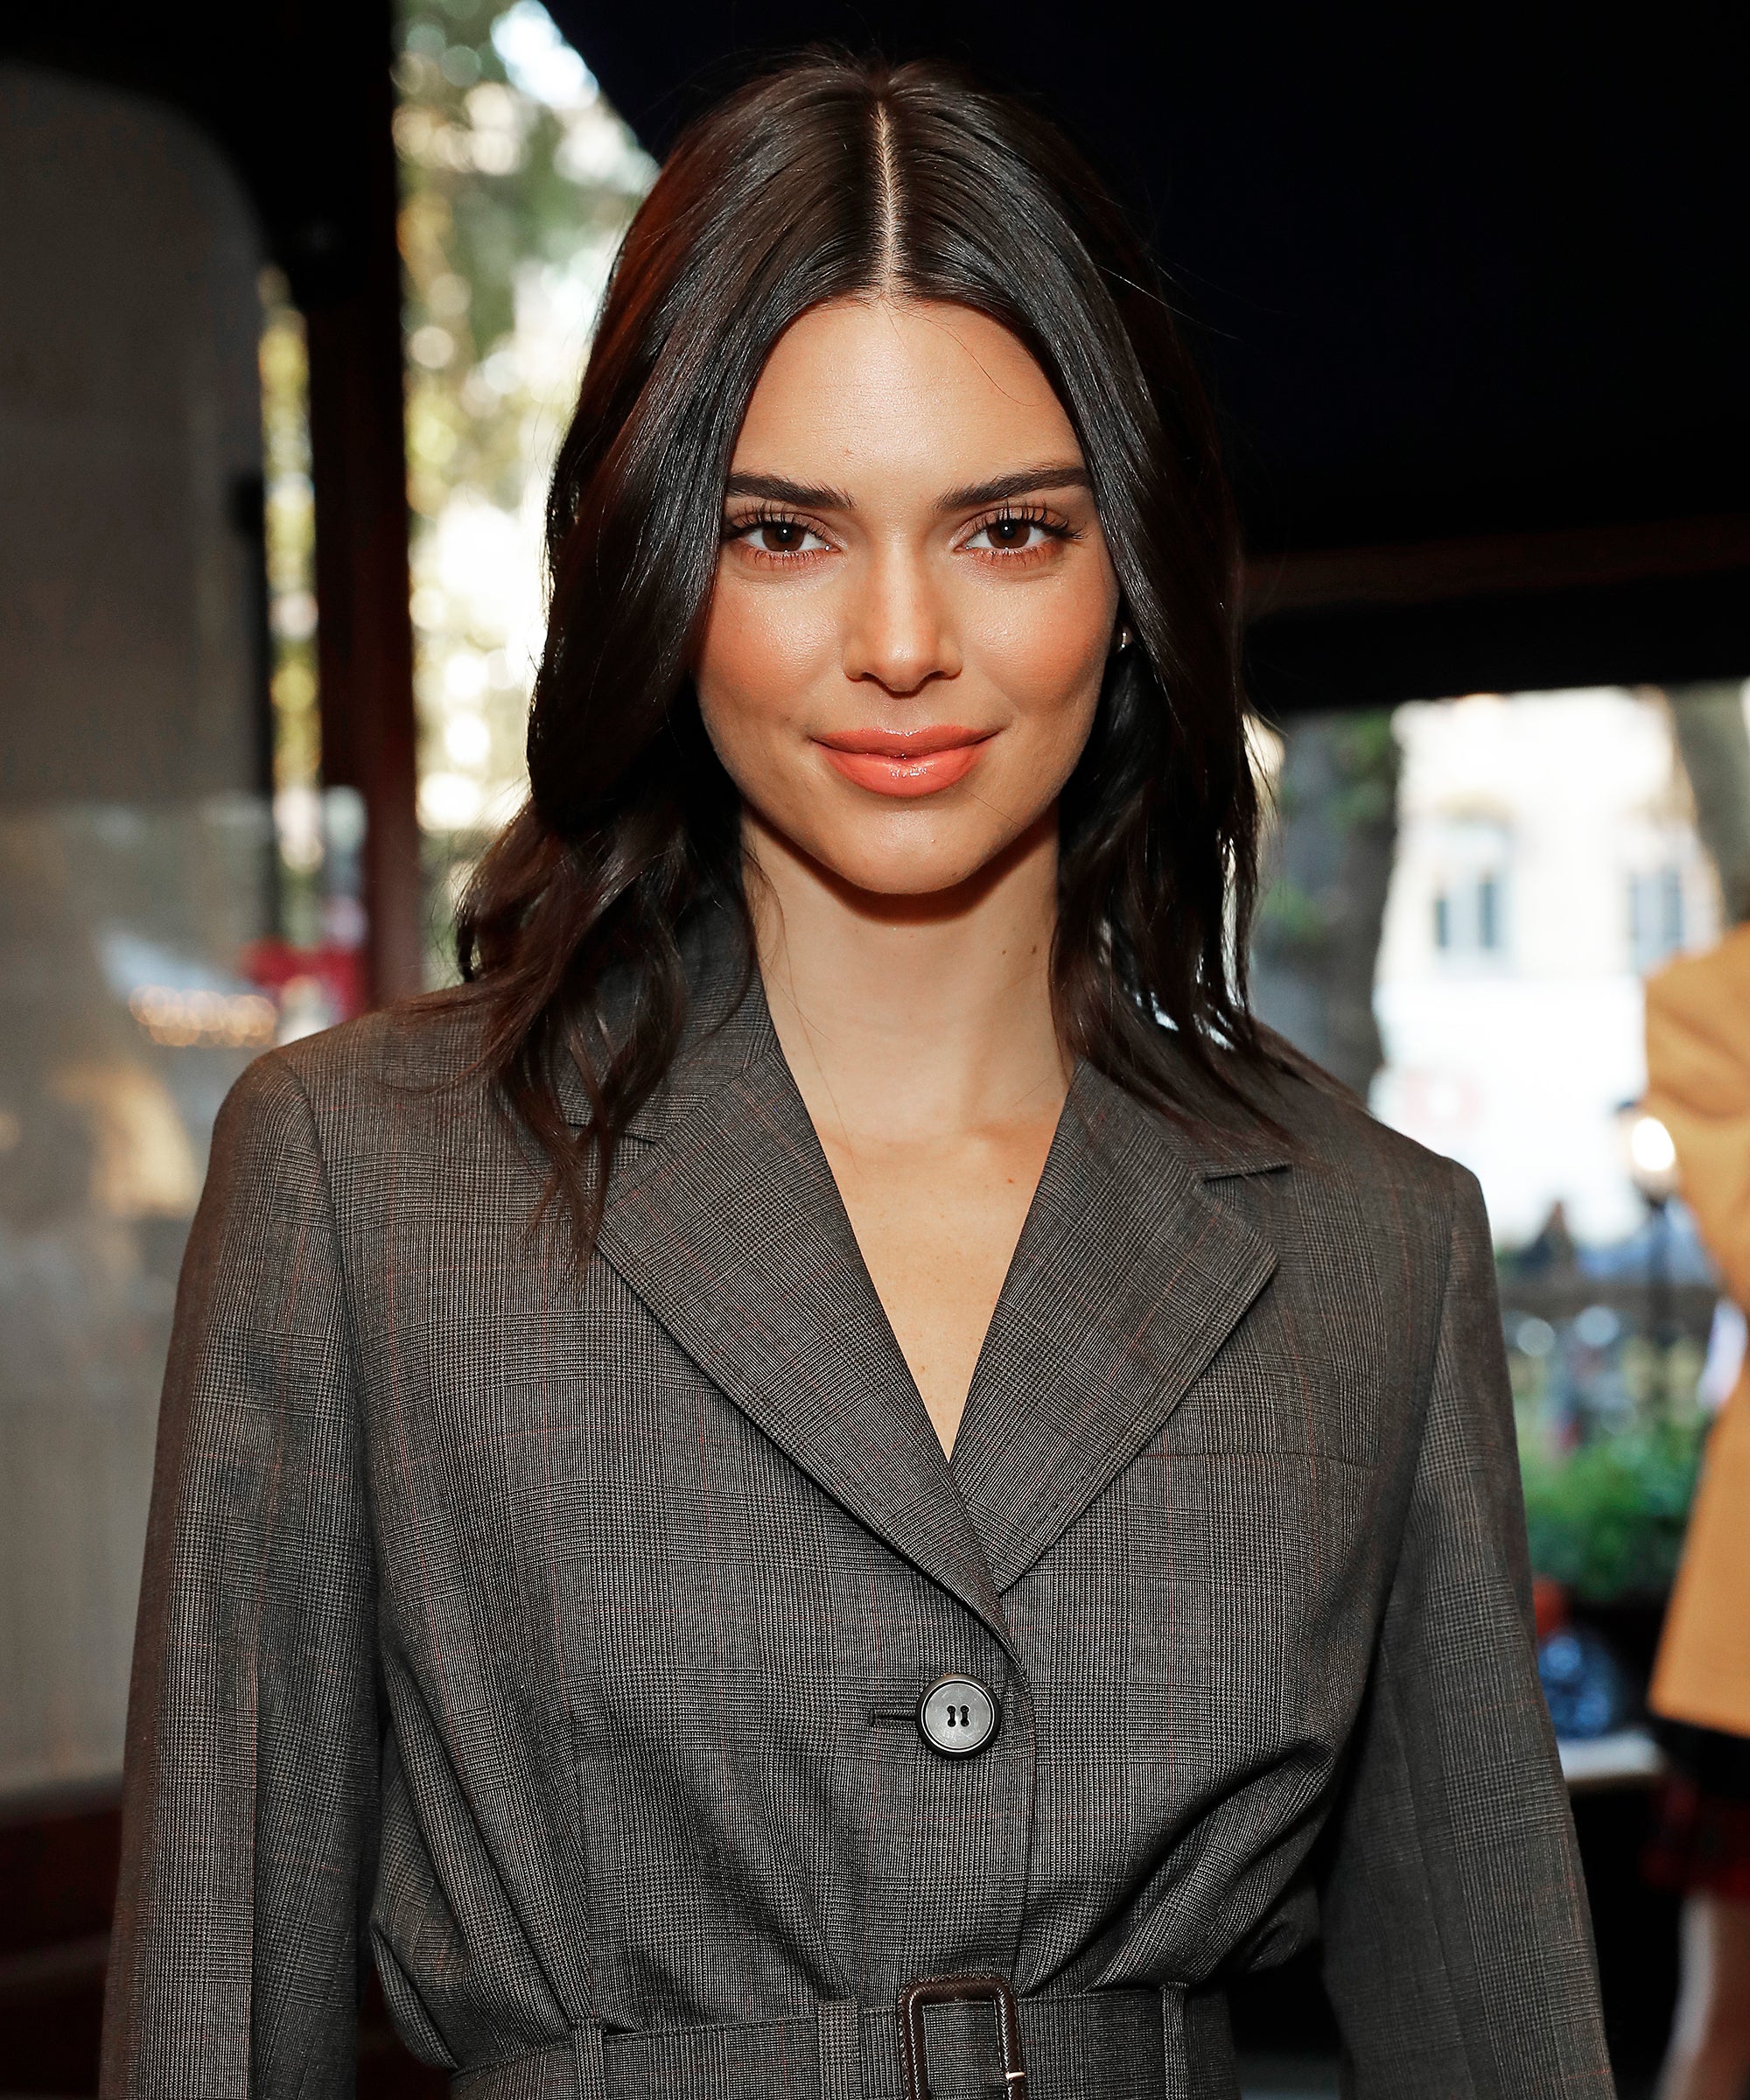 Kendall Jenner Reveals Blonde Hair For Fashion Week